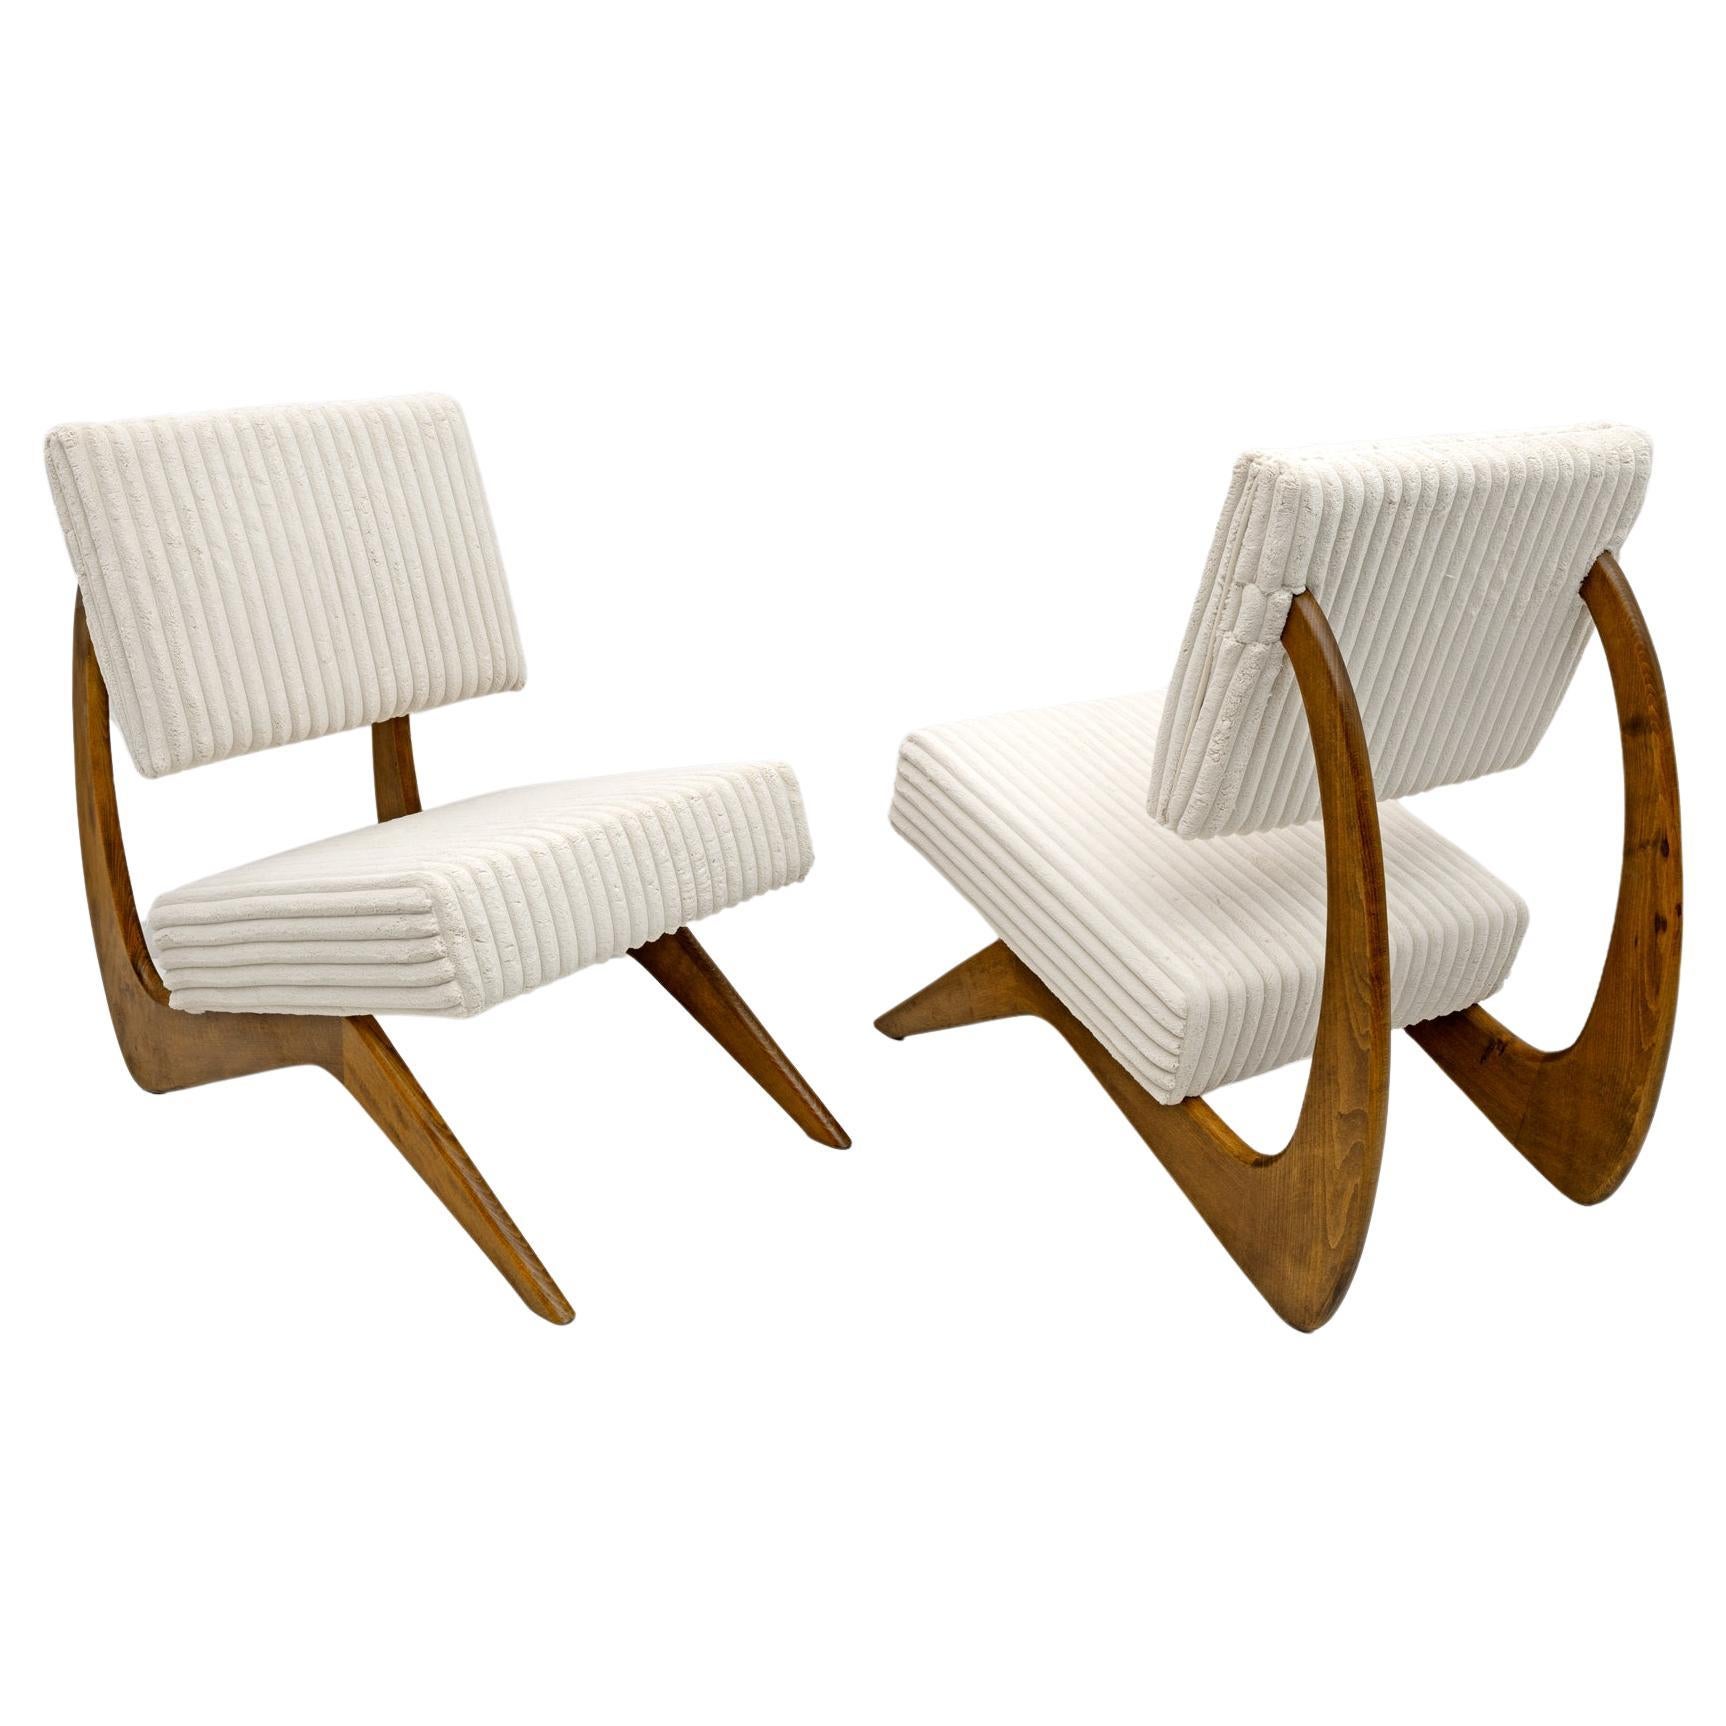 Pair of Adrian Pearsall Midcentury Walnut Lounge Chairs for Craft Associates For Sale